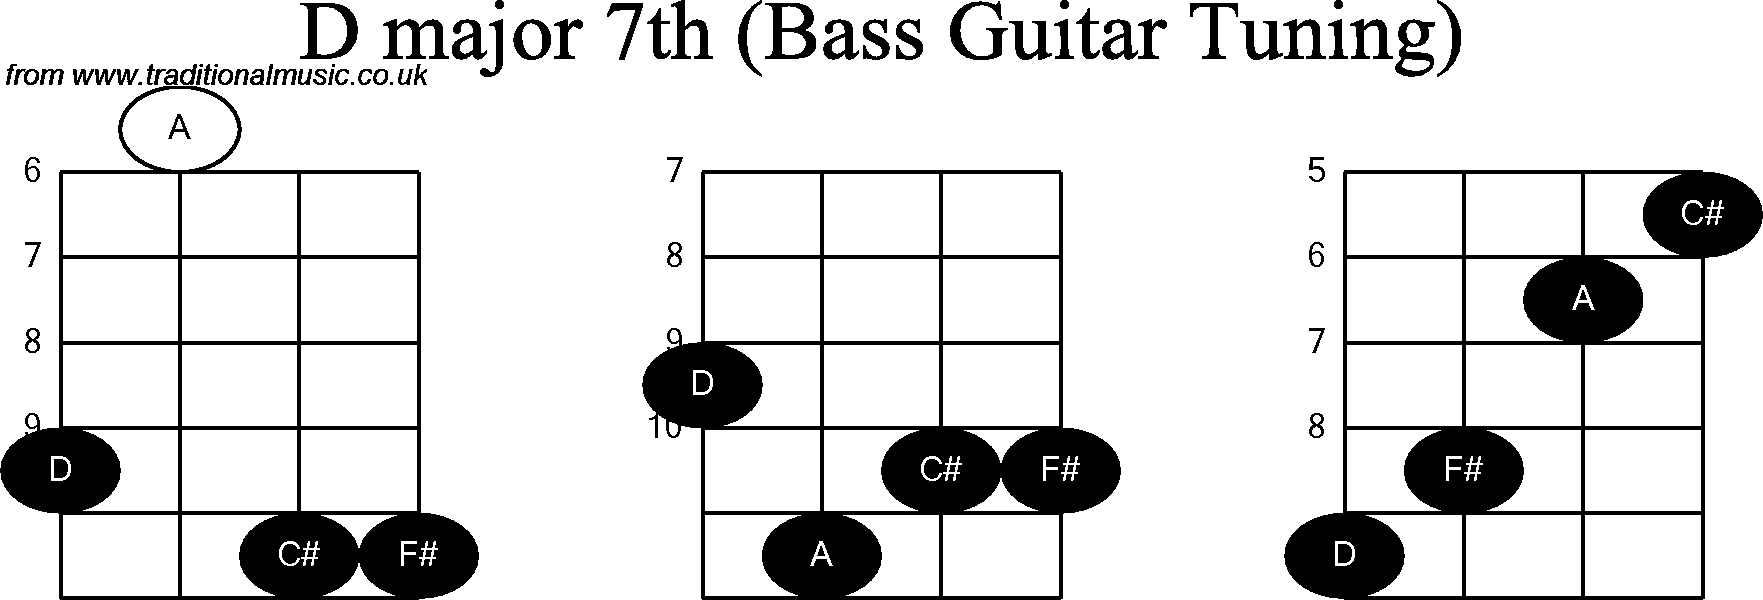 Bass Guitar chord charts for: D Major 7th